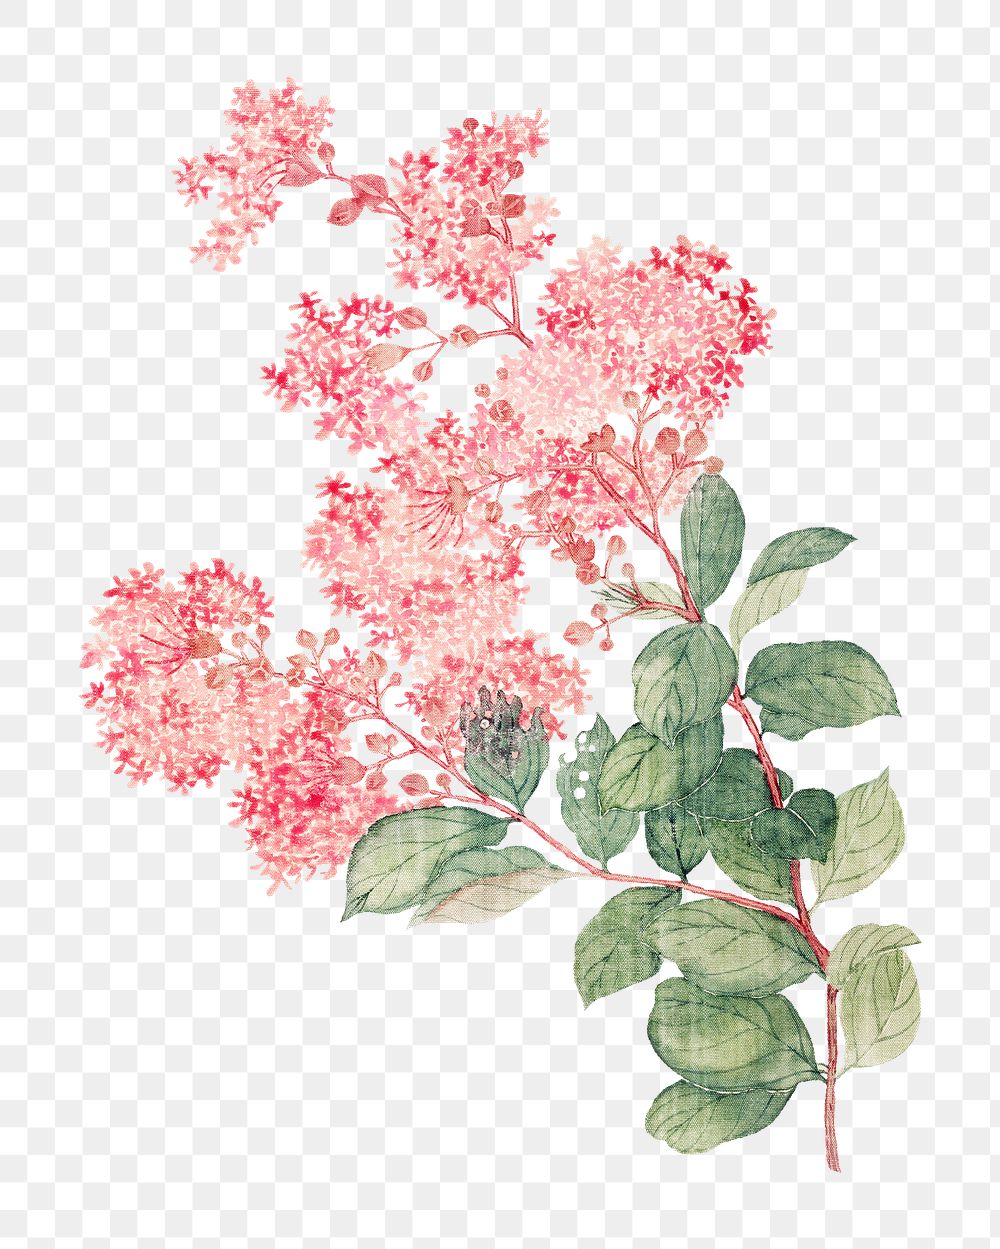 PNG Hydrangea, vintage flower illustration by Ma Yuanyu, transparent background. Remixed by rawpixel.